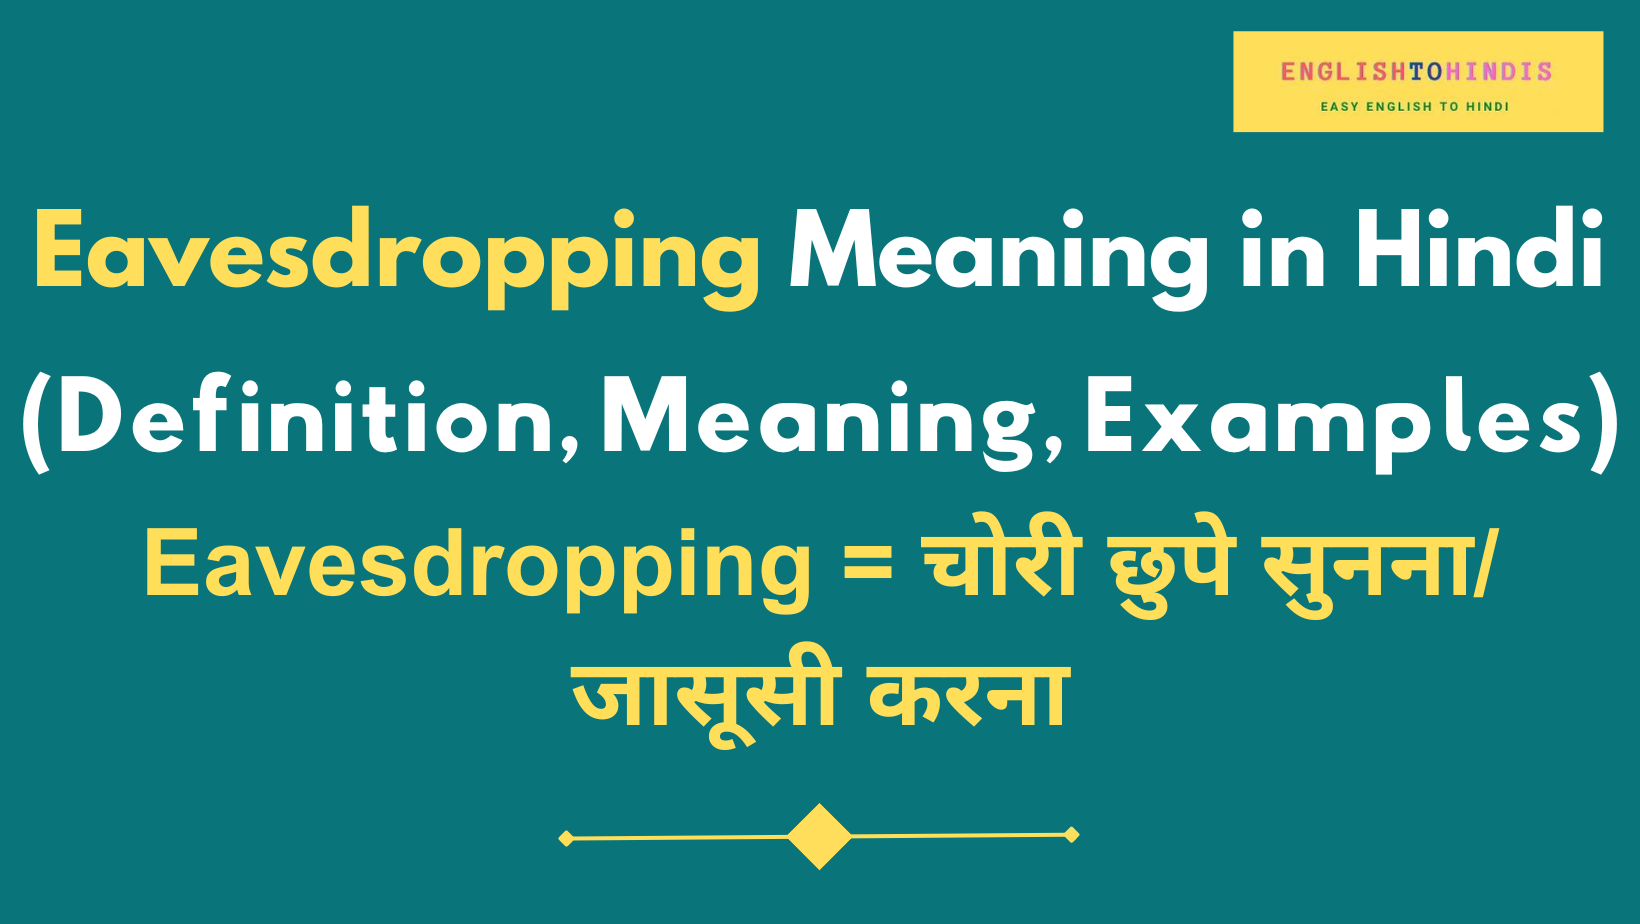 Eavesdropping Meaning in Hindi